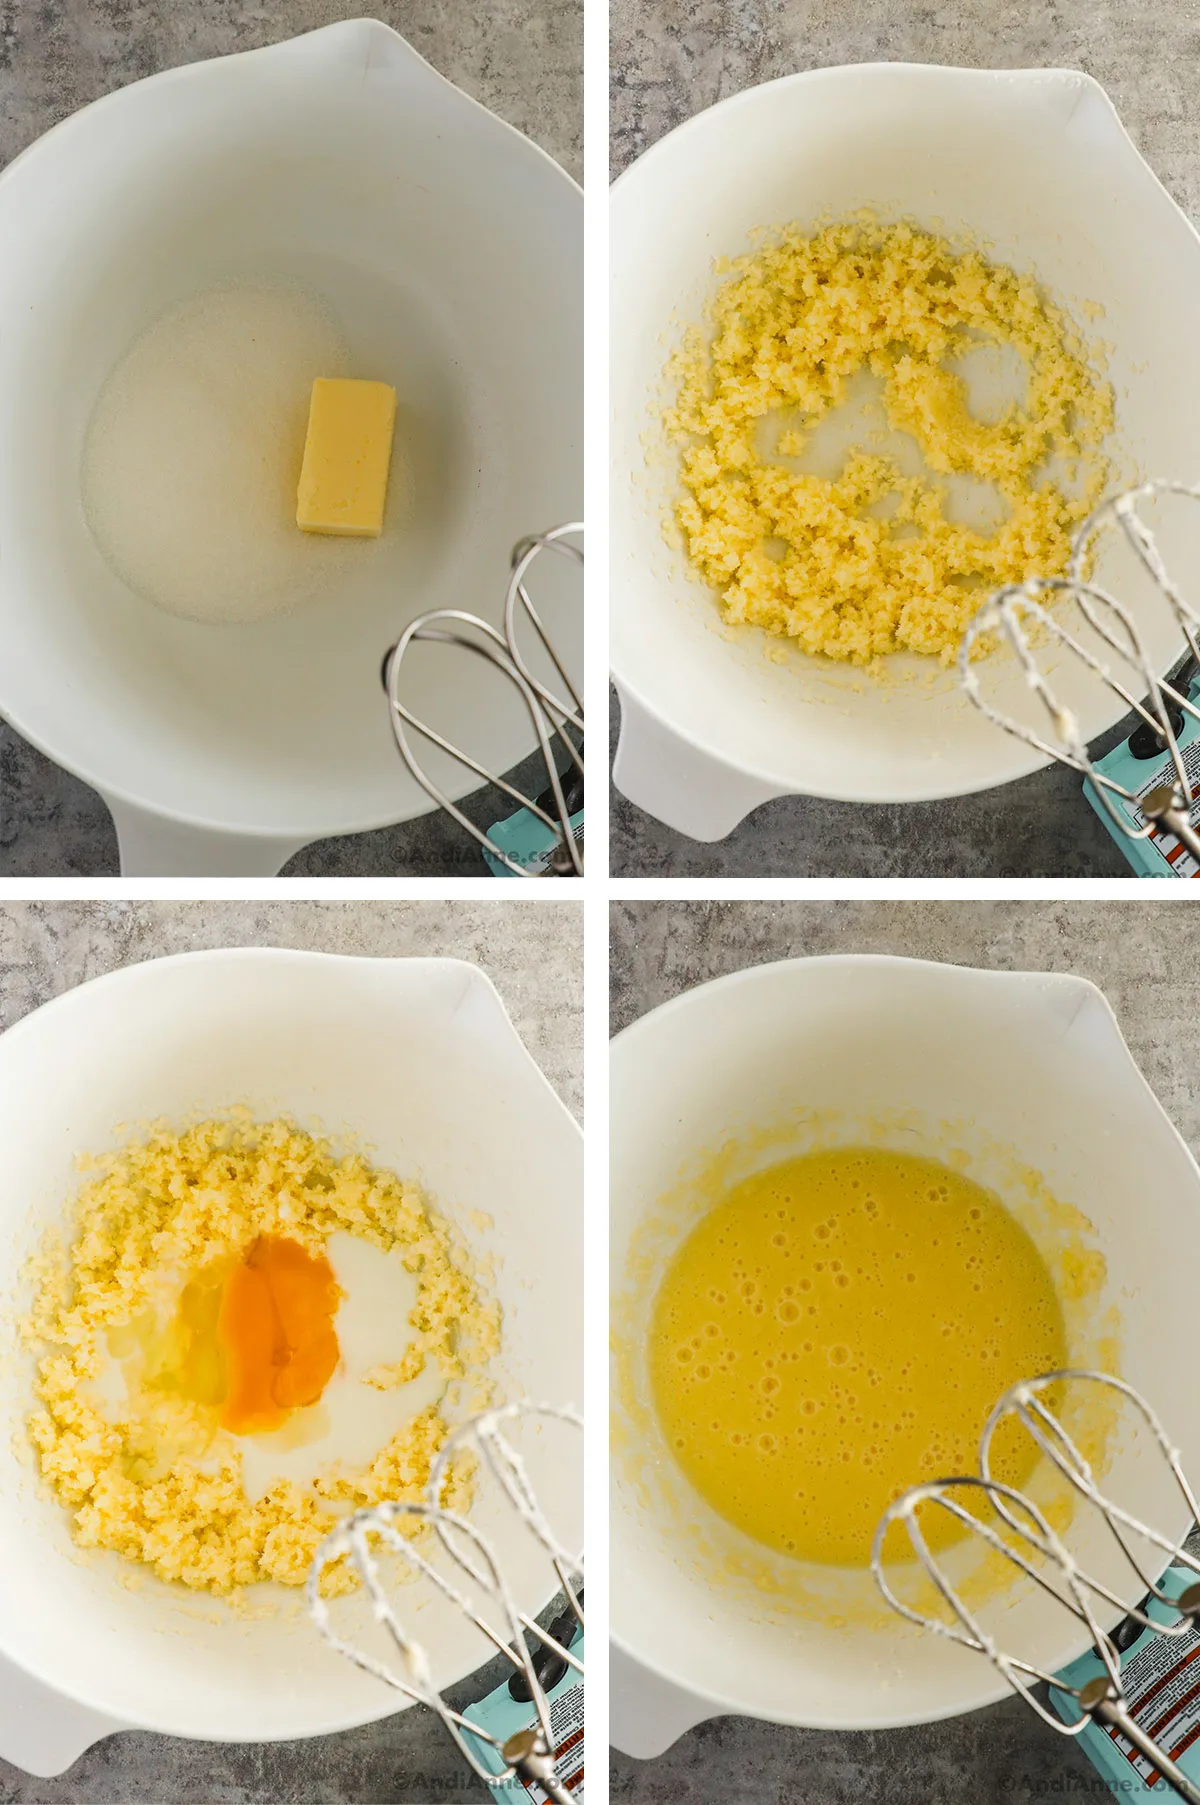 Four images of a bowl. First is butter and sugar. Second is creamed butter, third has eggs and milk dumped in. Fourth is a yellow liquid all blended together.